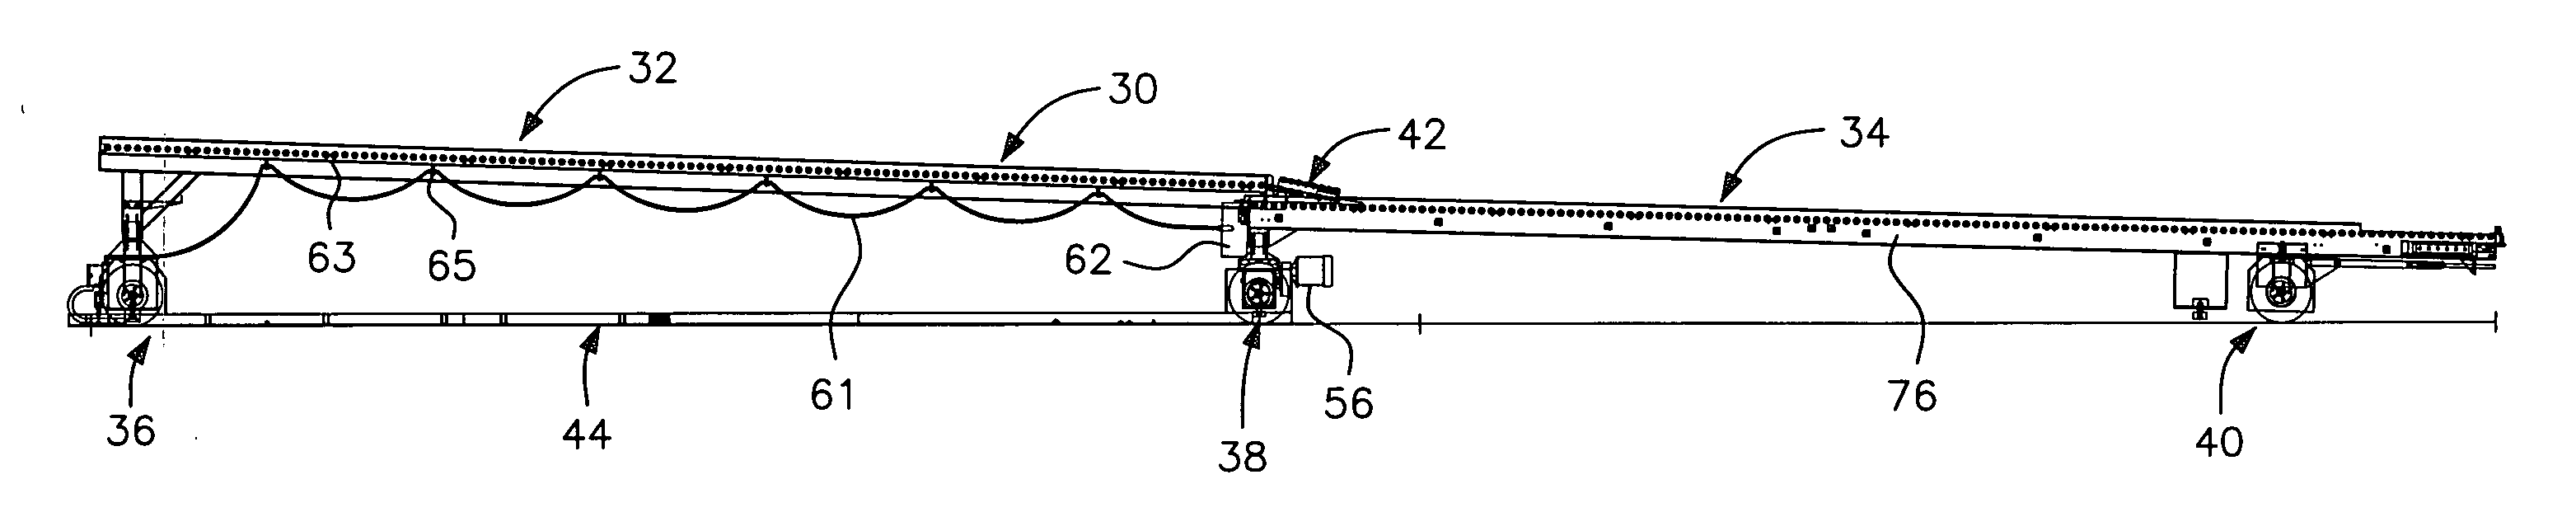 Steerable telescoping conveyor for loading parcels